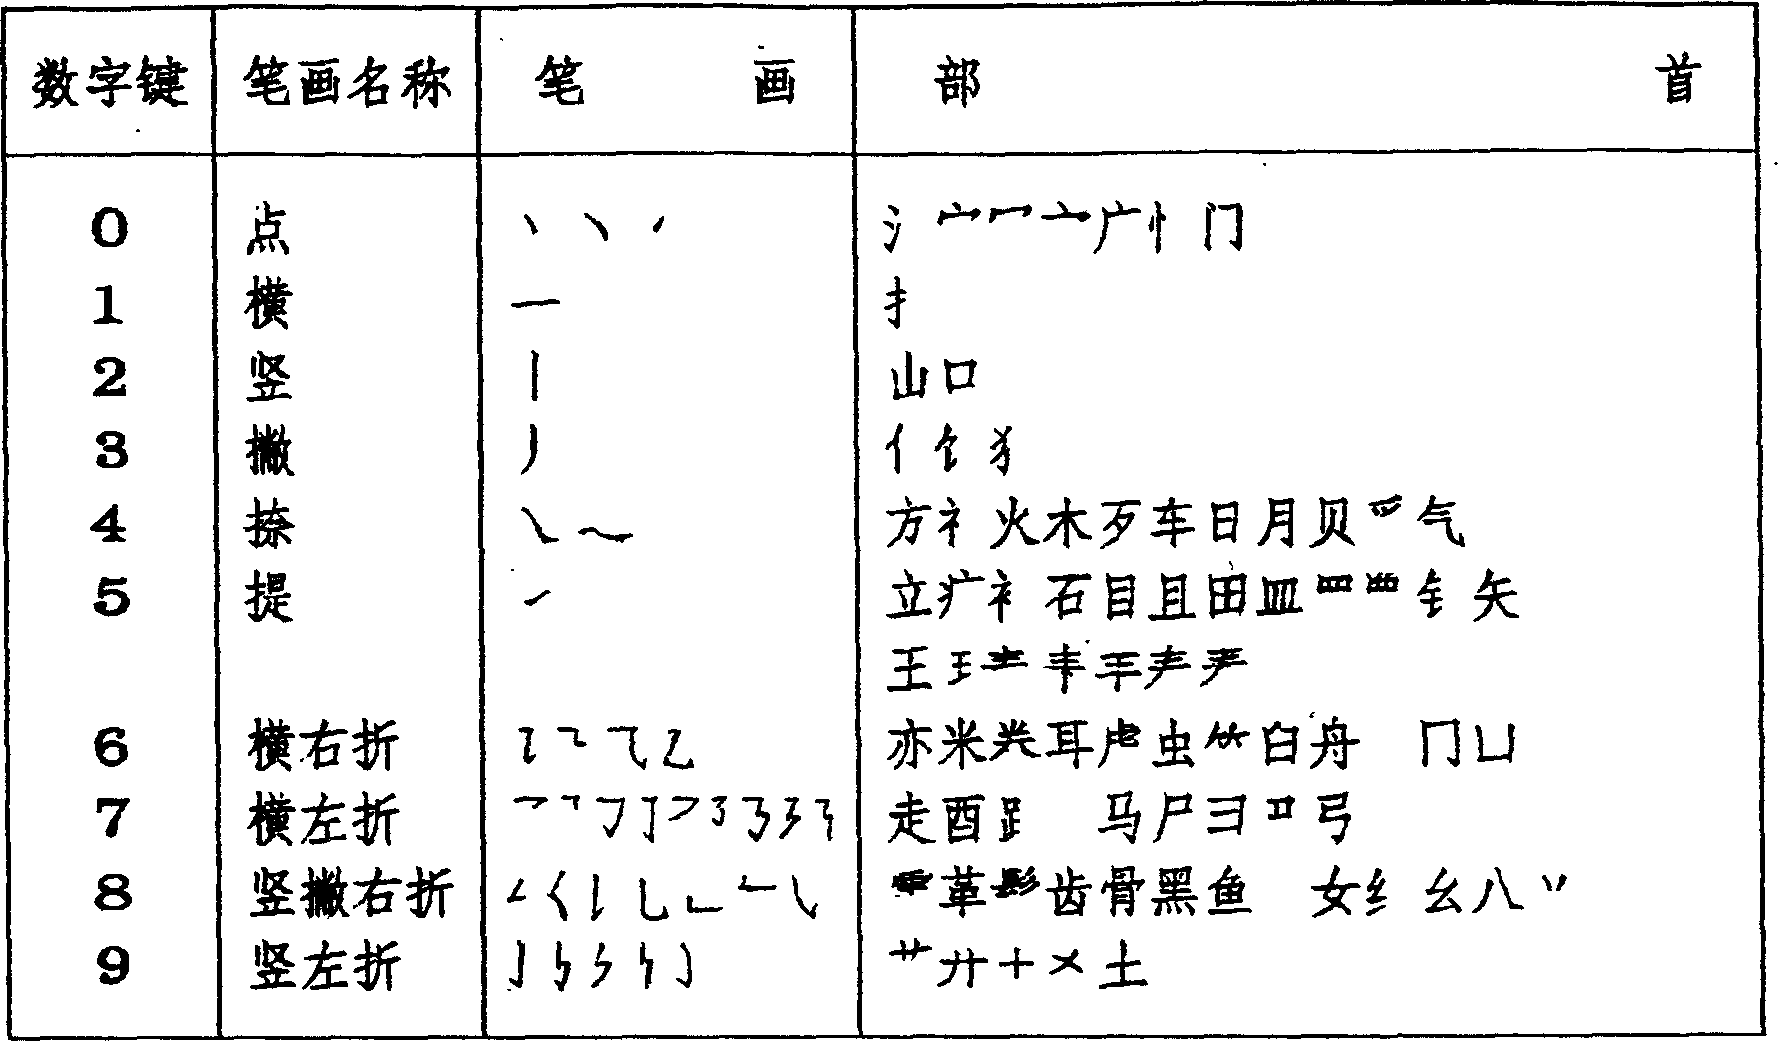 Method for inputting Chinese characters by numeral keys